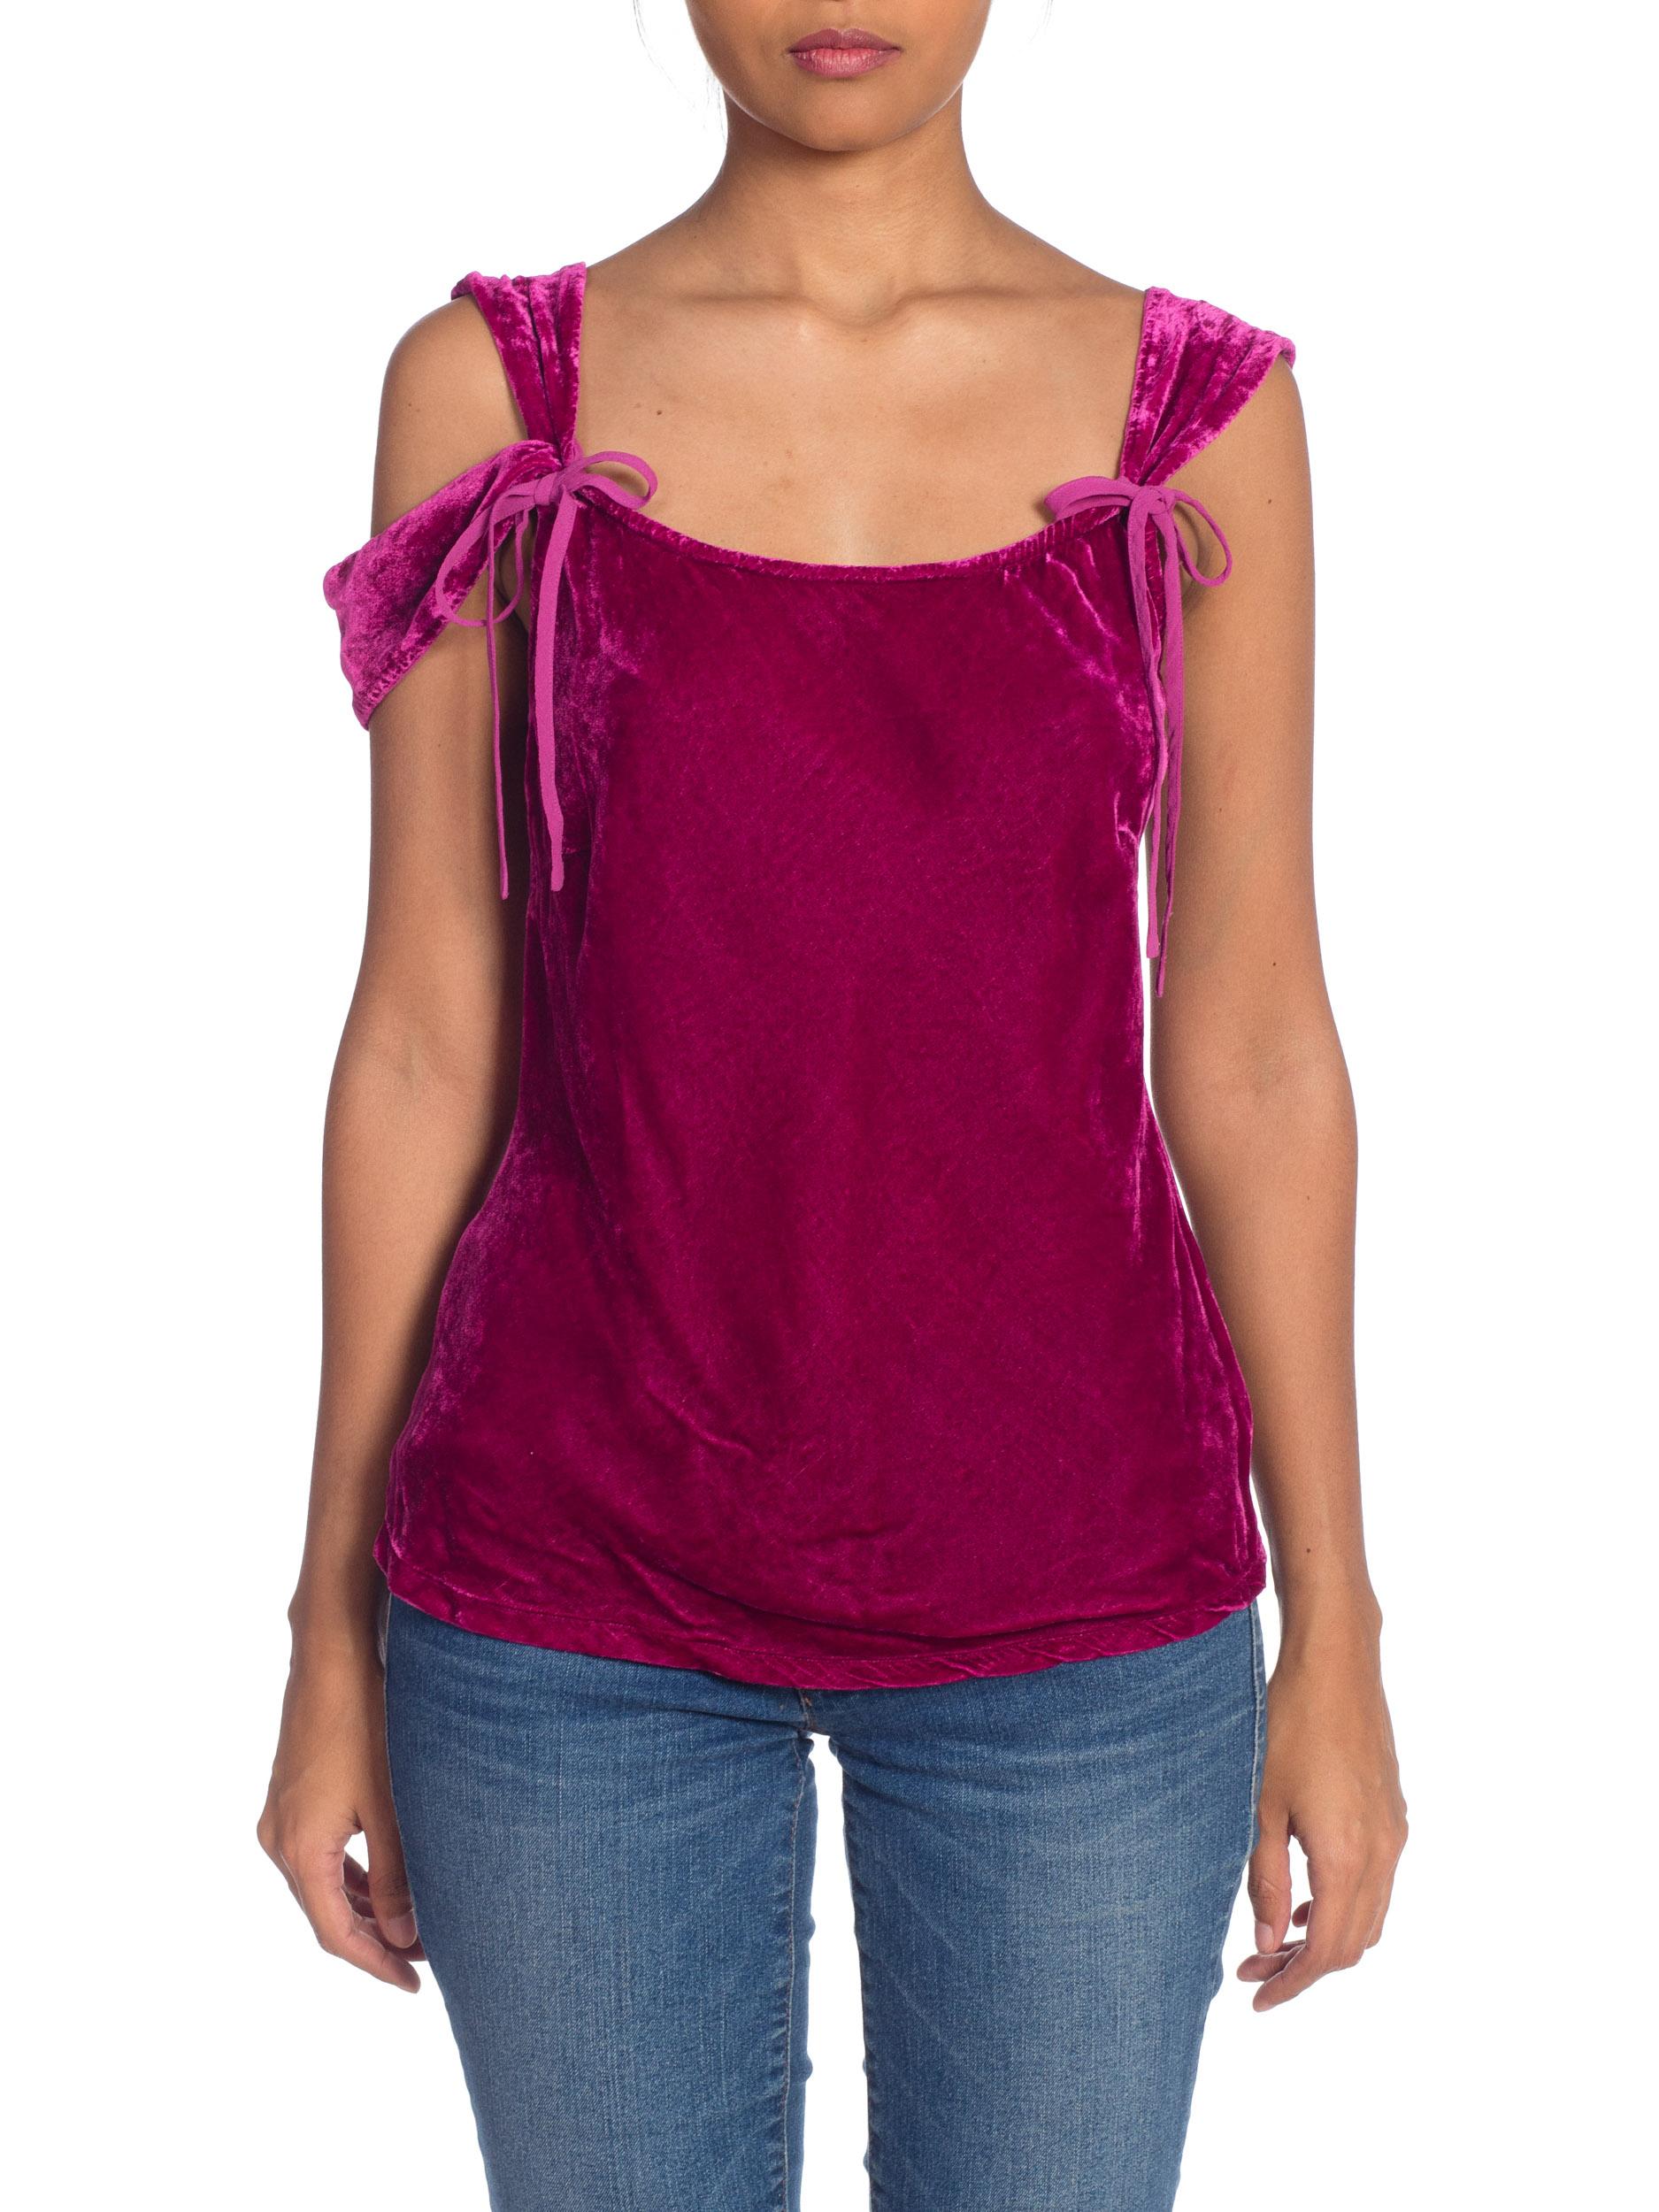 1990s Ghost Bias Cut Galliano Style Pink Velvet Top im Zustand „Gut“ in New York, NY